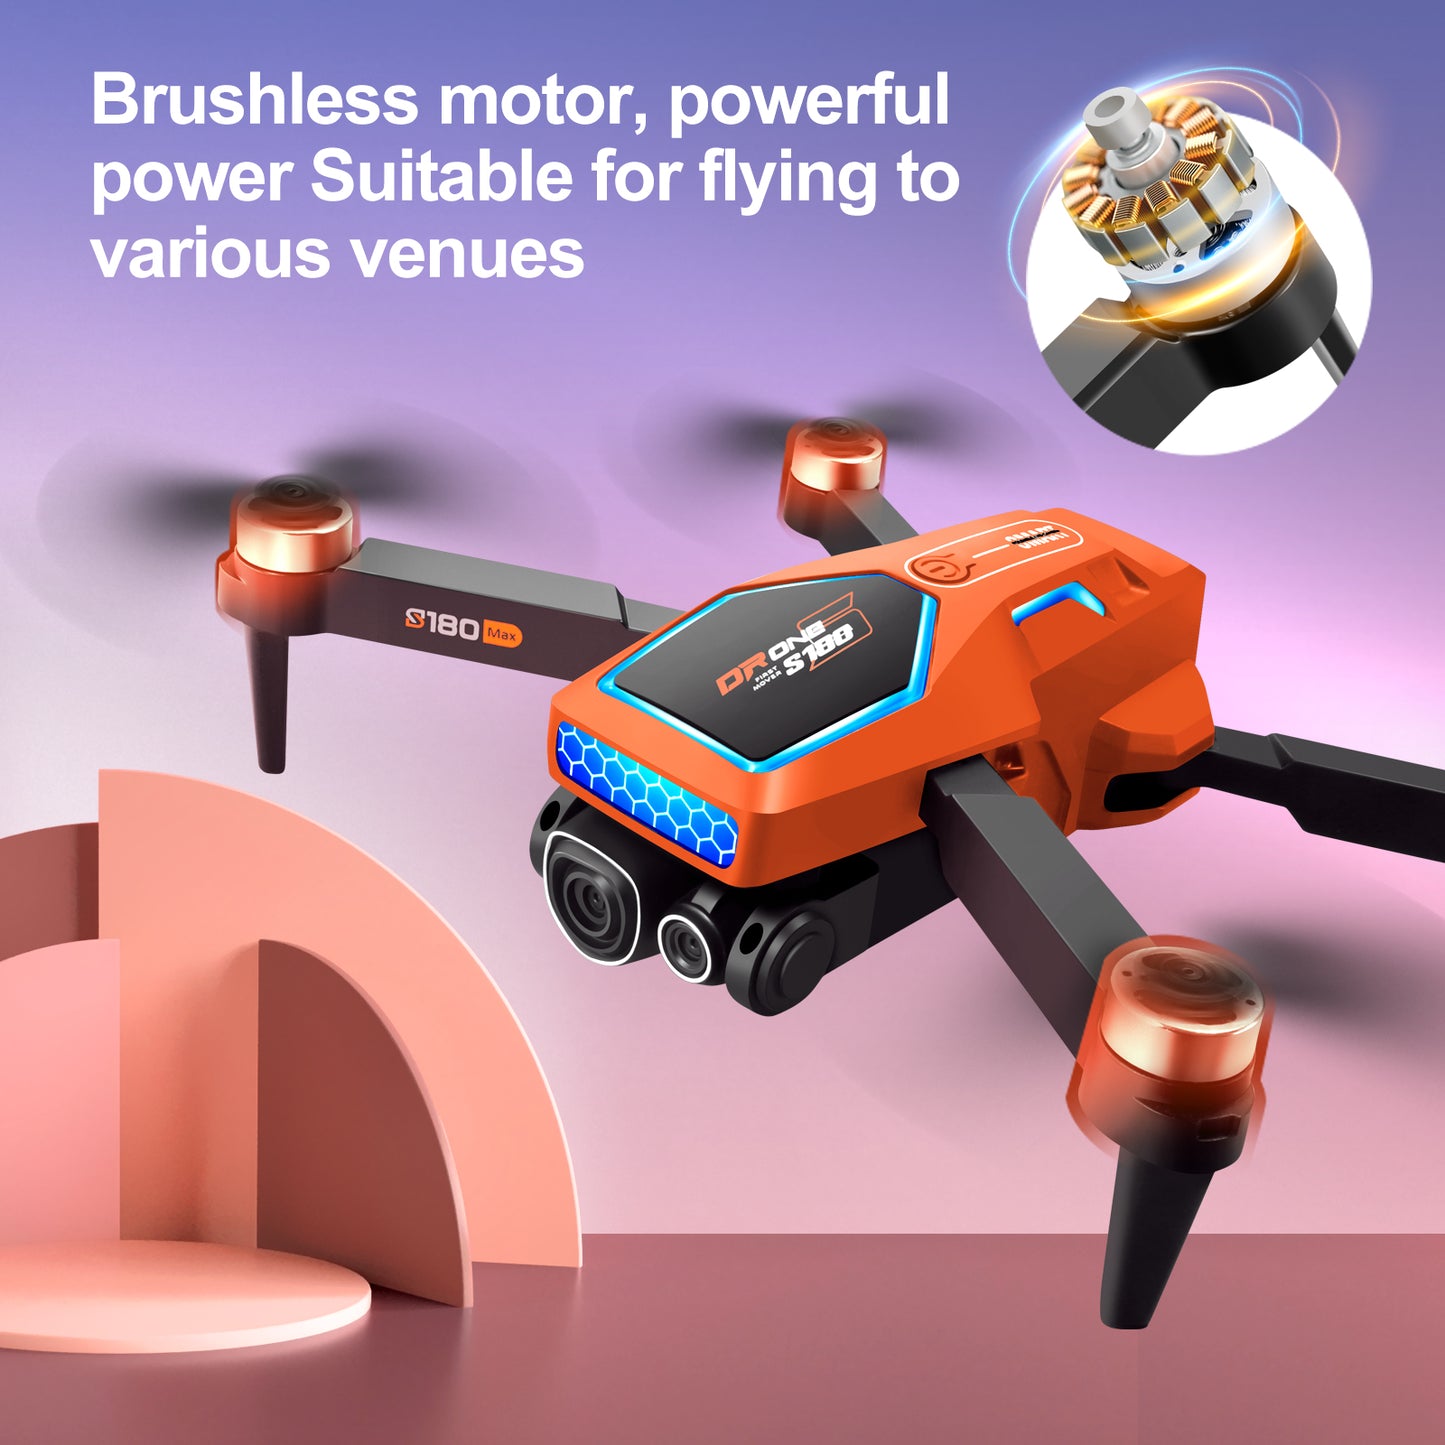 S180 Drone, High-performance drone with brushless motor for smooth flight and speeds up to 35.22 km/h.